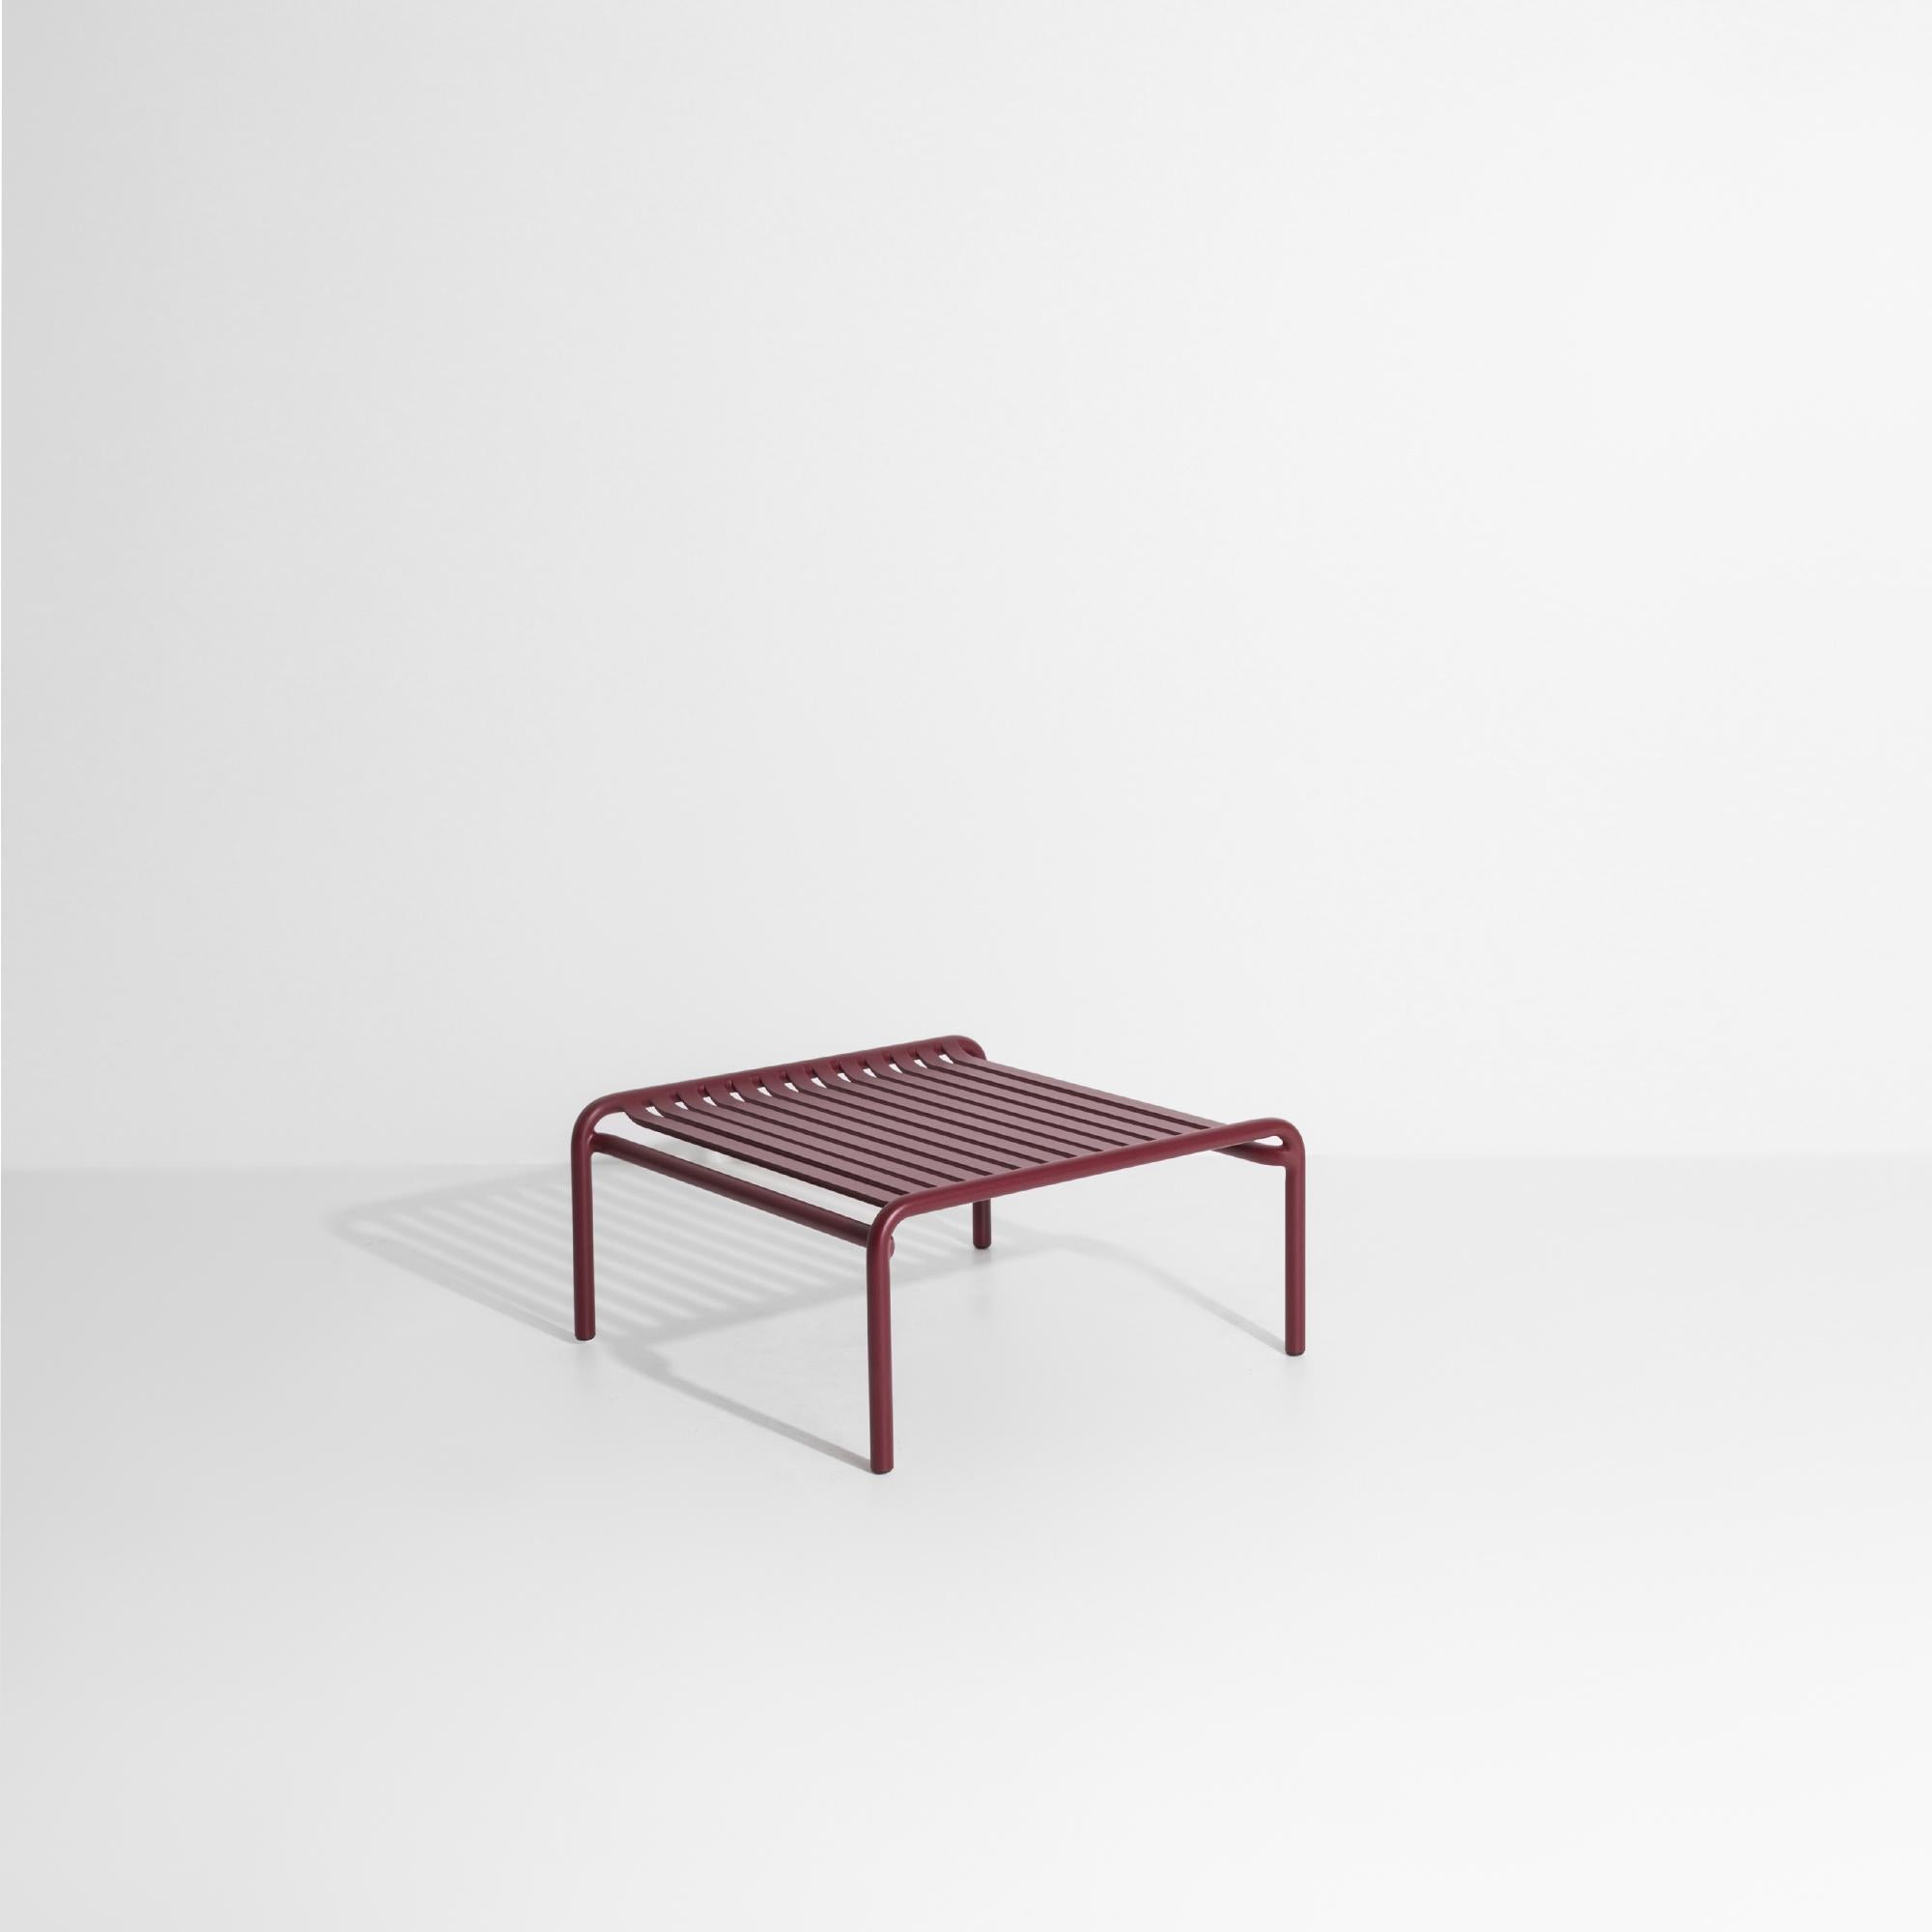 Petite Friture Week-End Coffee Table in Burgundy Aluminium, 2017 In New Condition For Sale In Brooklyn, NY